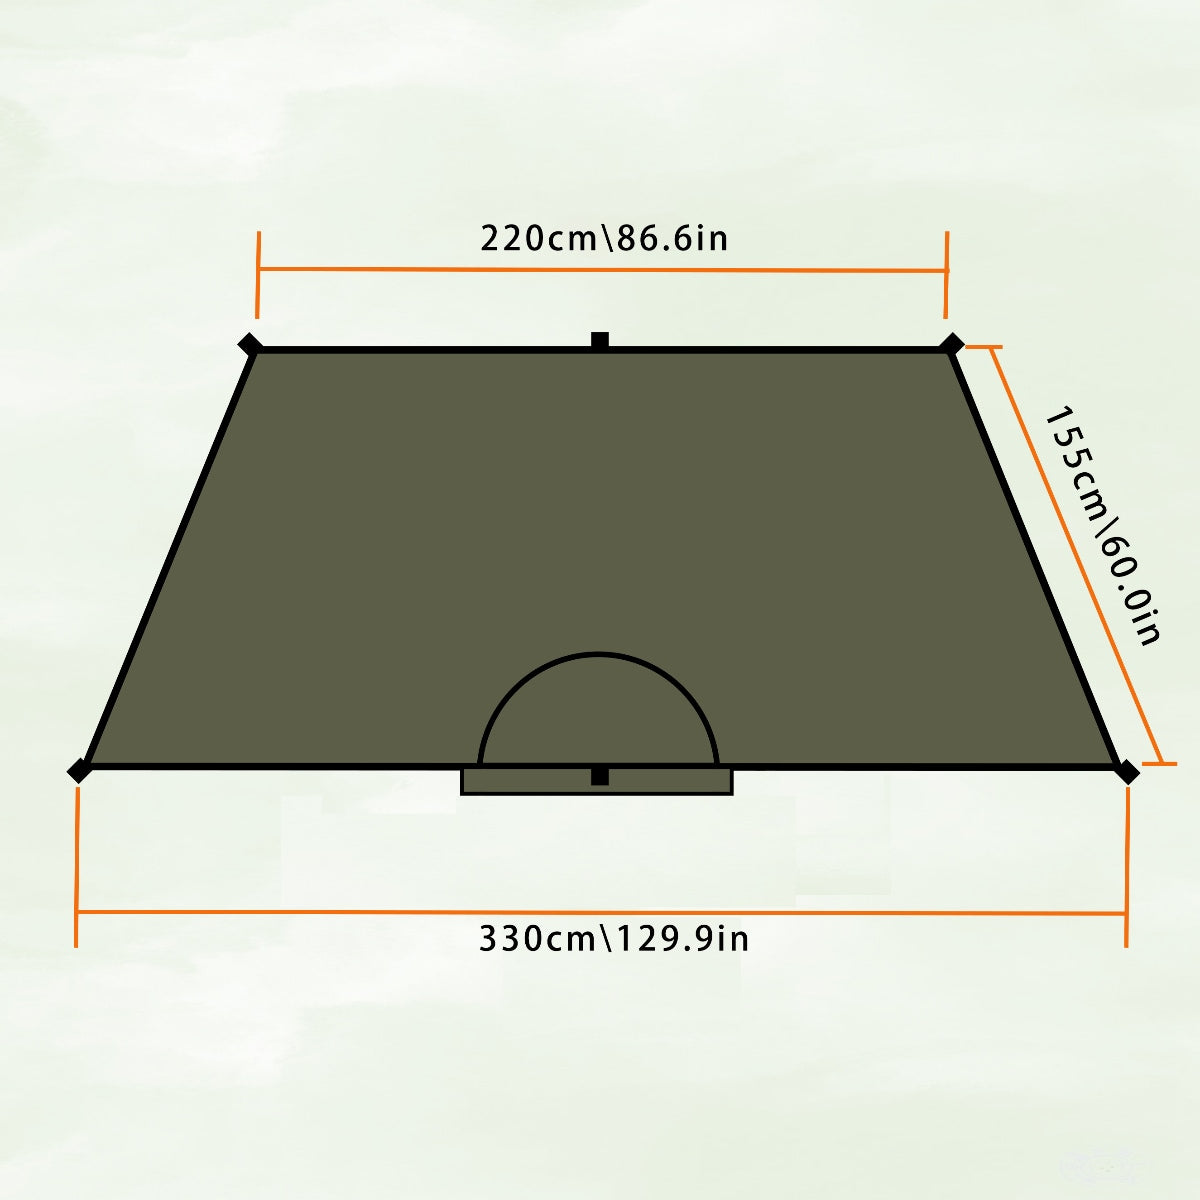 Solitary Ultralight Single-Topped Cape Shelter